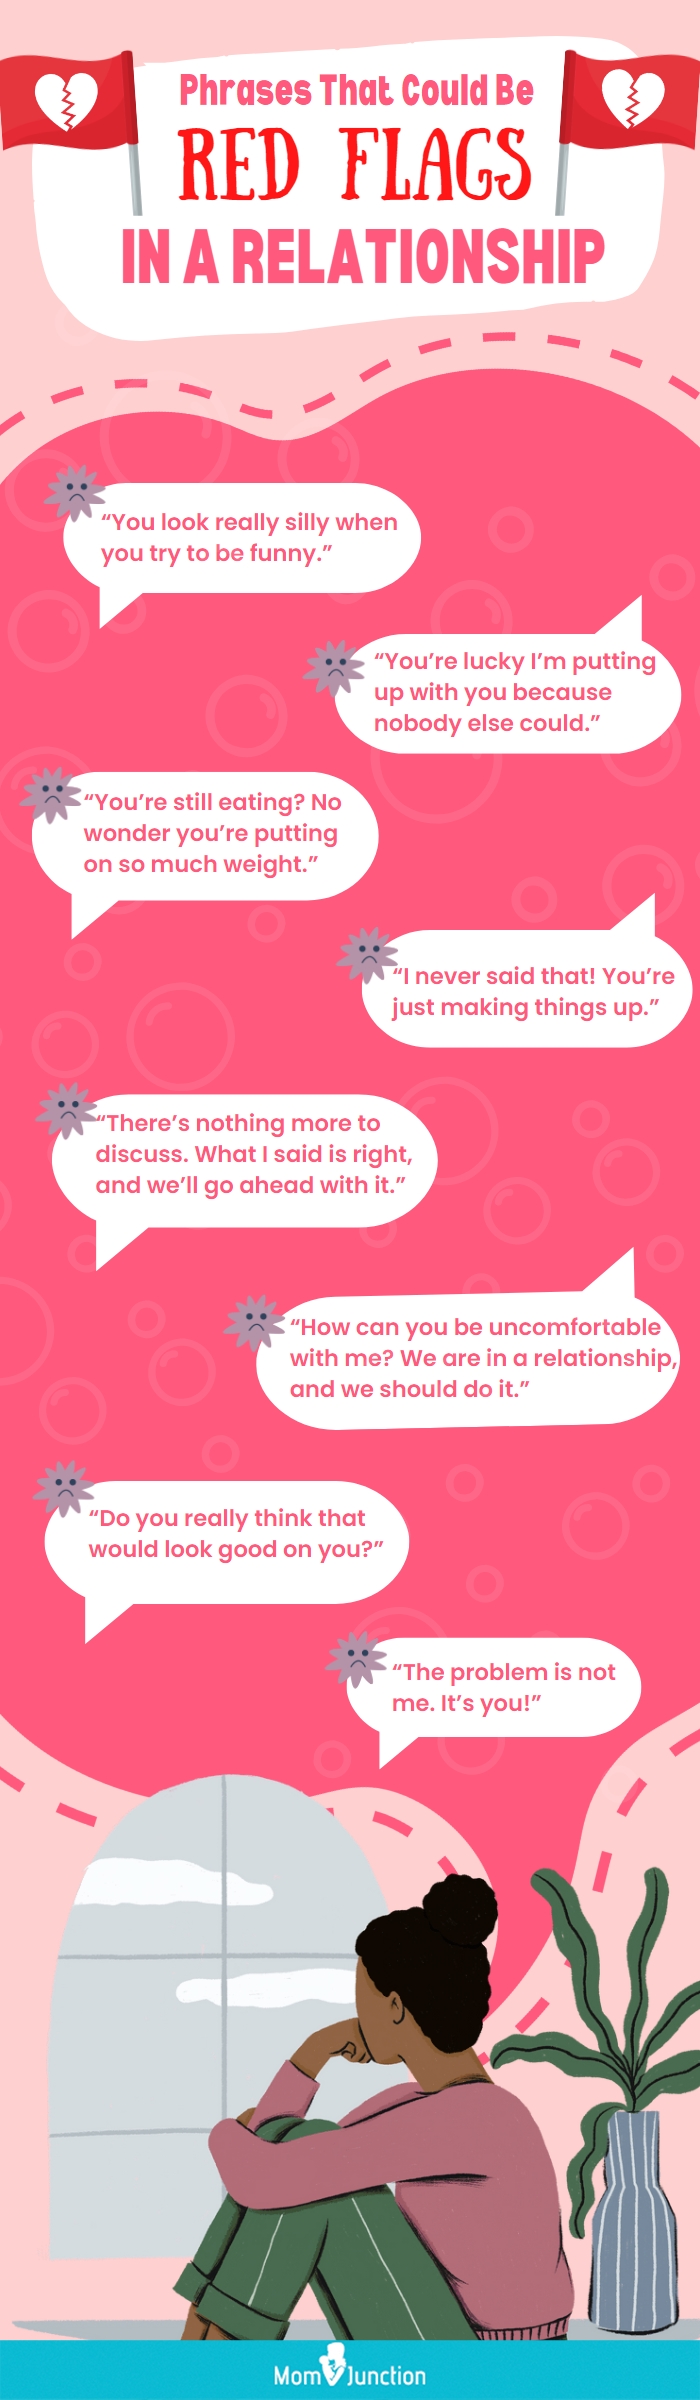 phrases that could be red flags in a relationship (infographic)